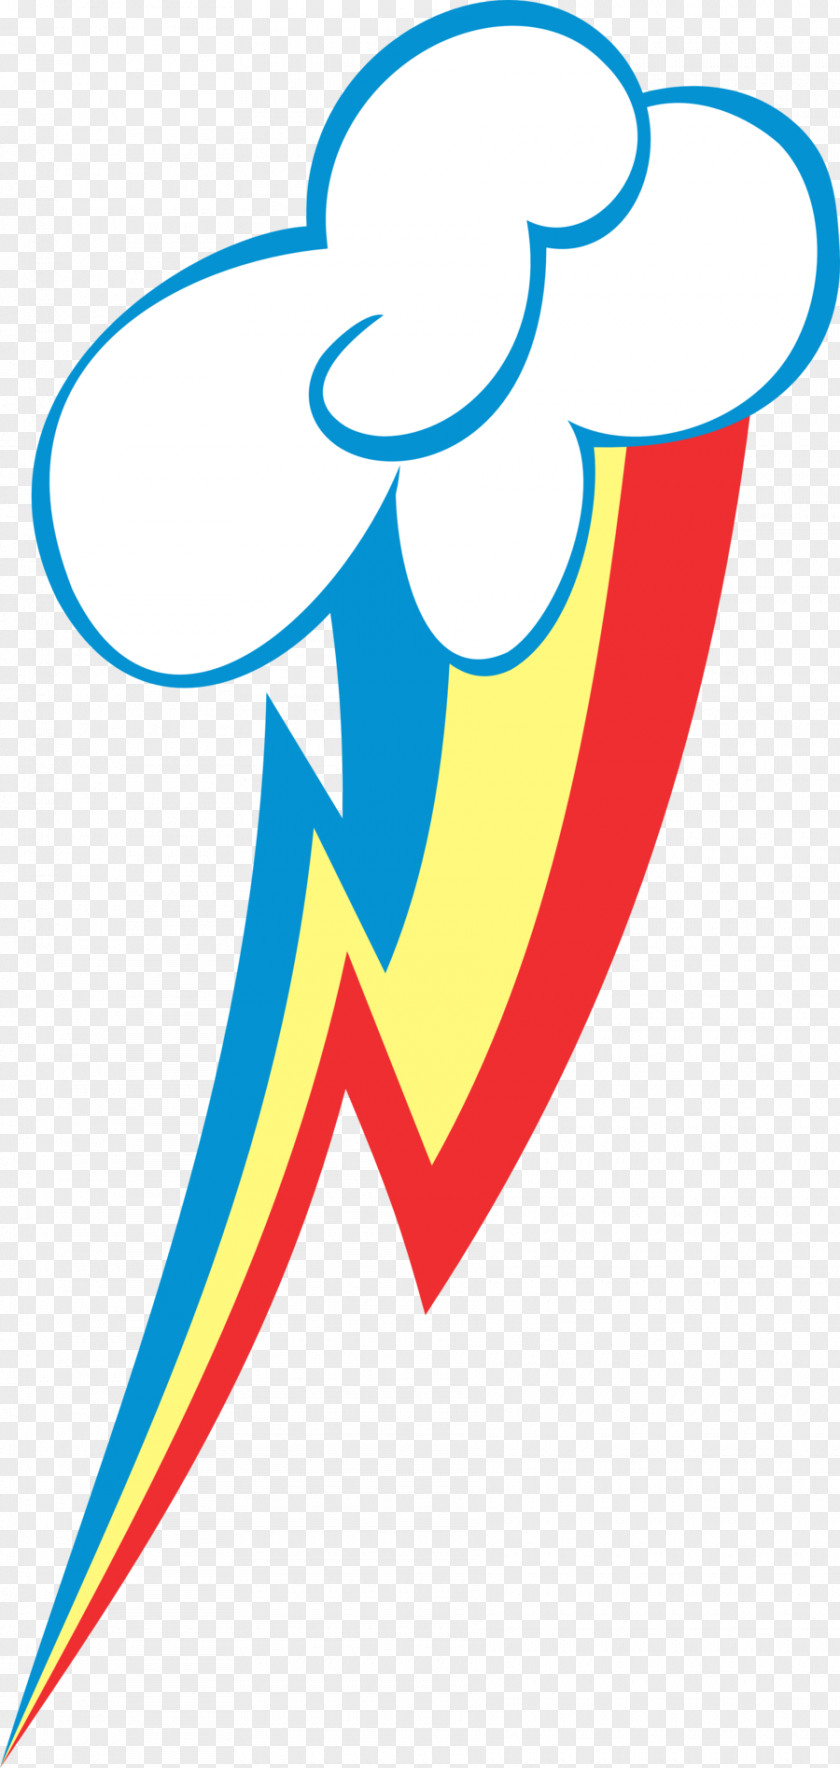 Dashed Vector Rainbow Dash Rarity Cutie Mark Crusaders My Little Pony PNG